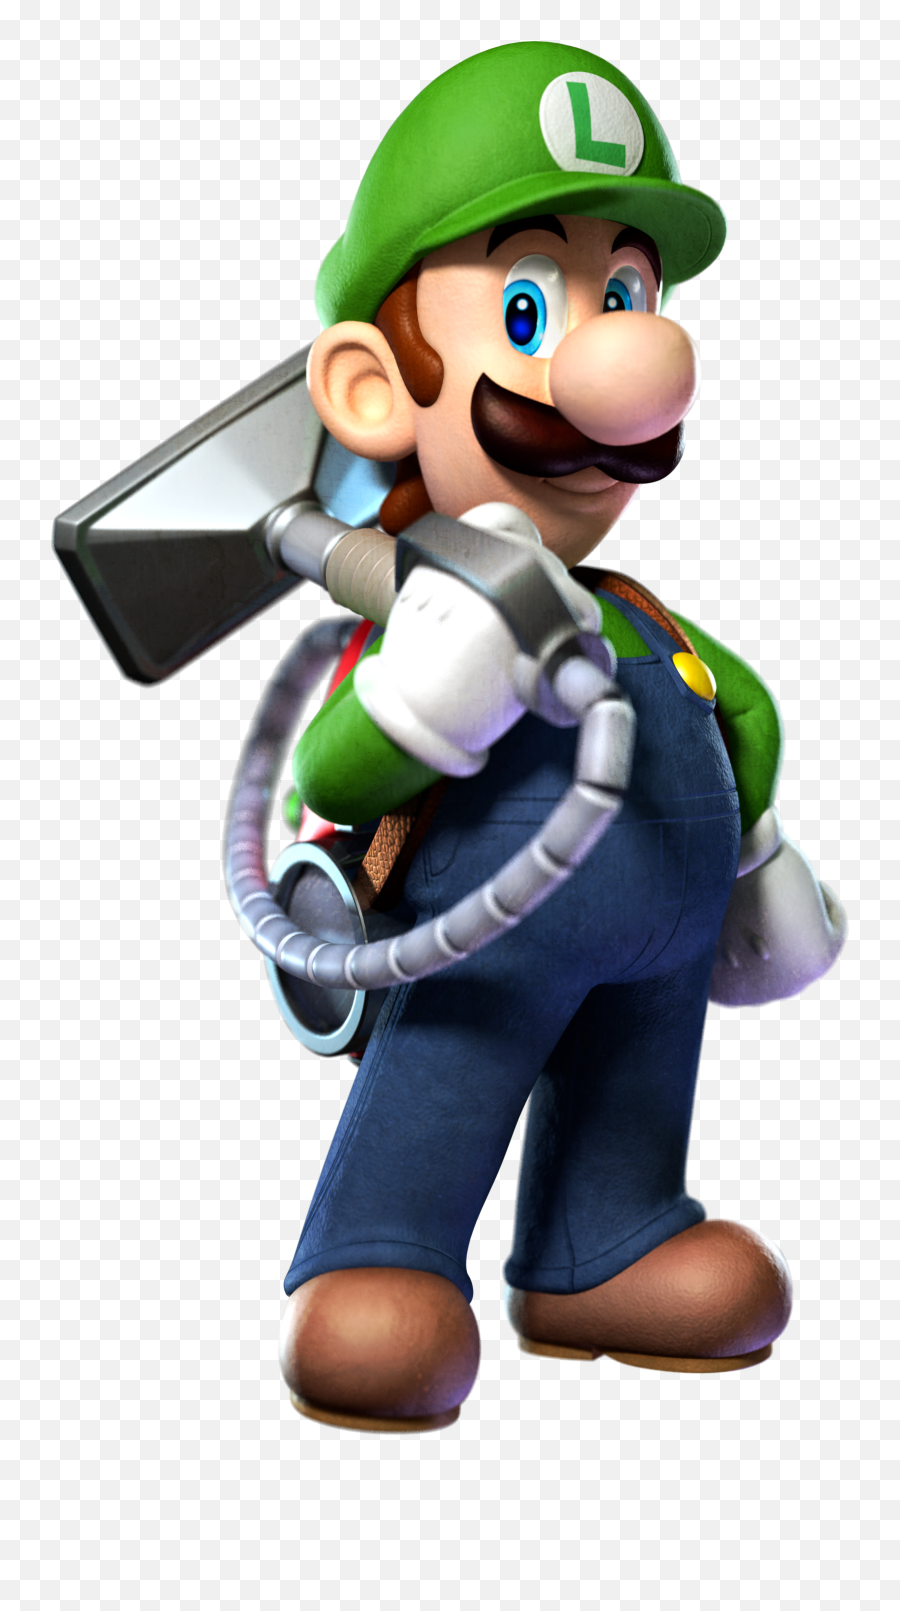 What We Can Expect And Hope From The New Super Smash Bros - Luigis Mansion 2 Luigi Emoji,Mario Kart Inkling Emoticon